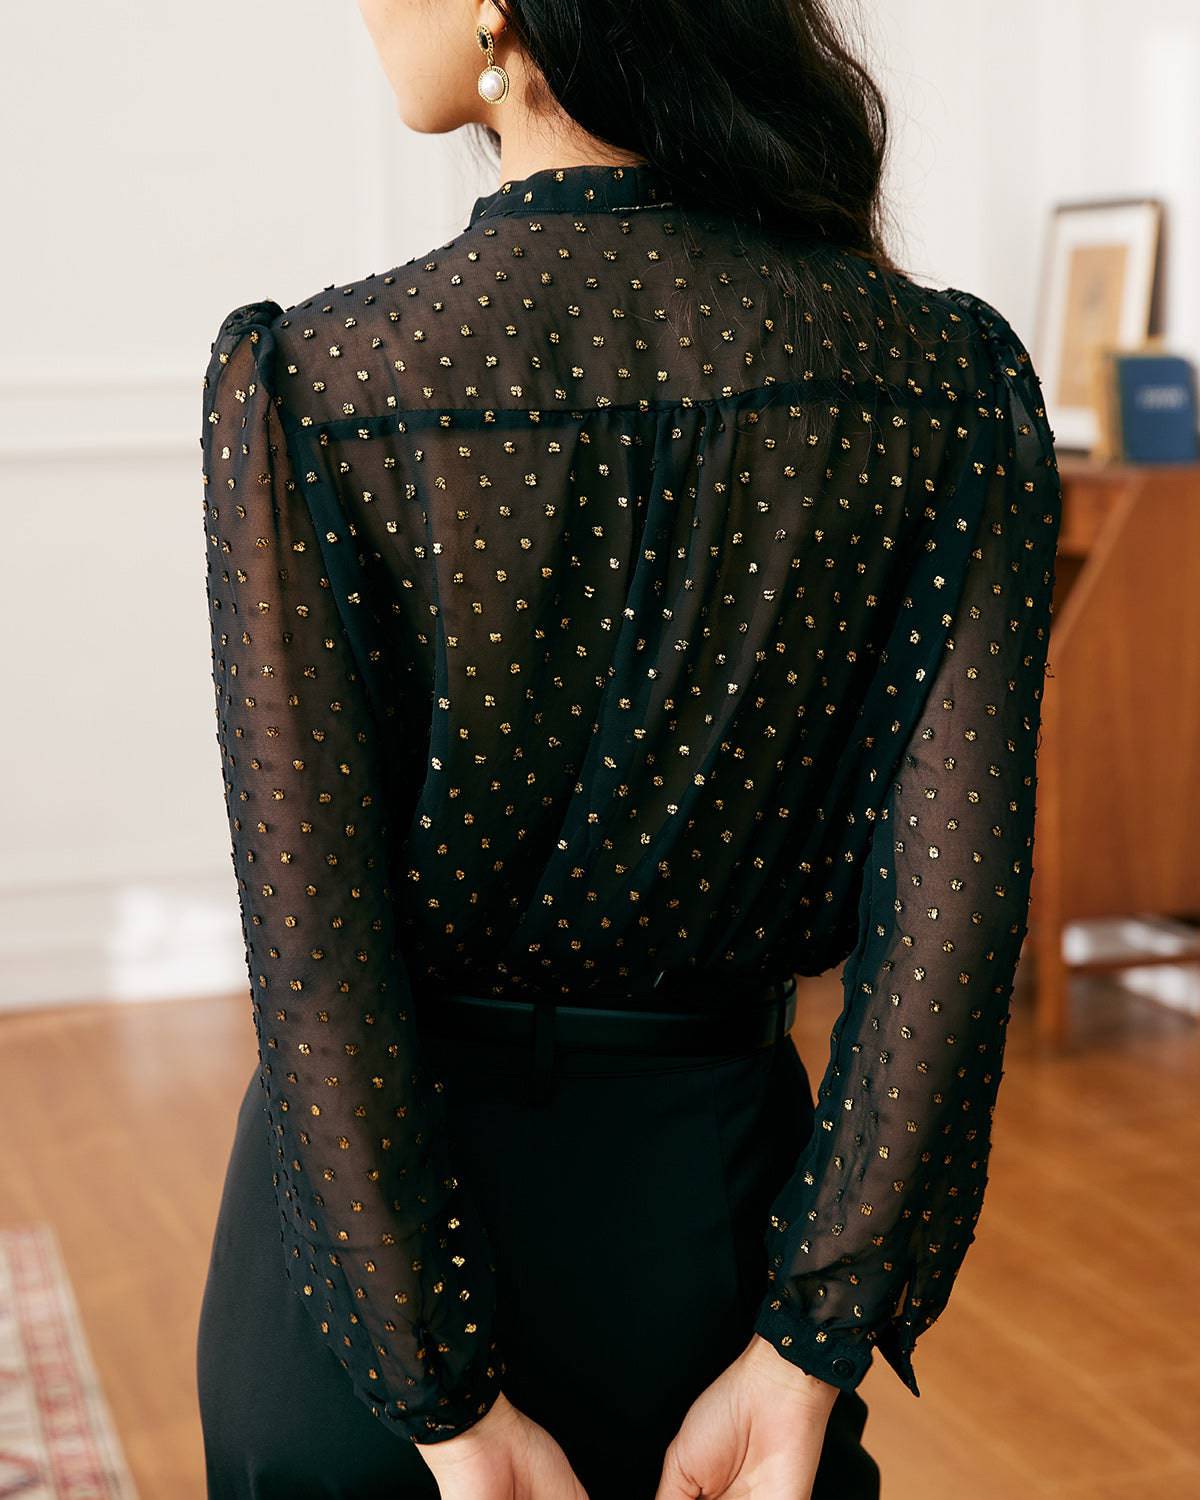 The Black See Through Double Layers Shirt: Women's Sheer Long Sleeve,  Layering Top - Black - Tops